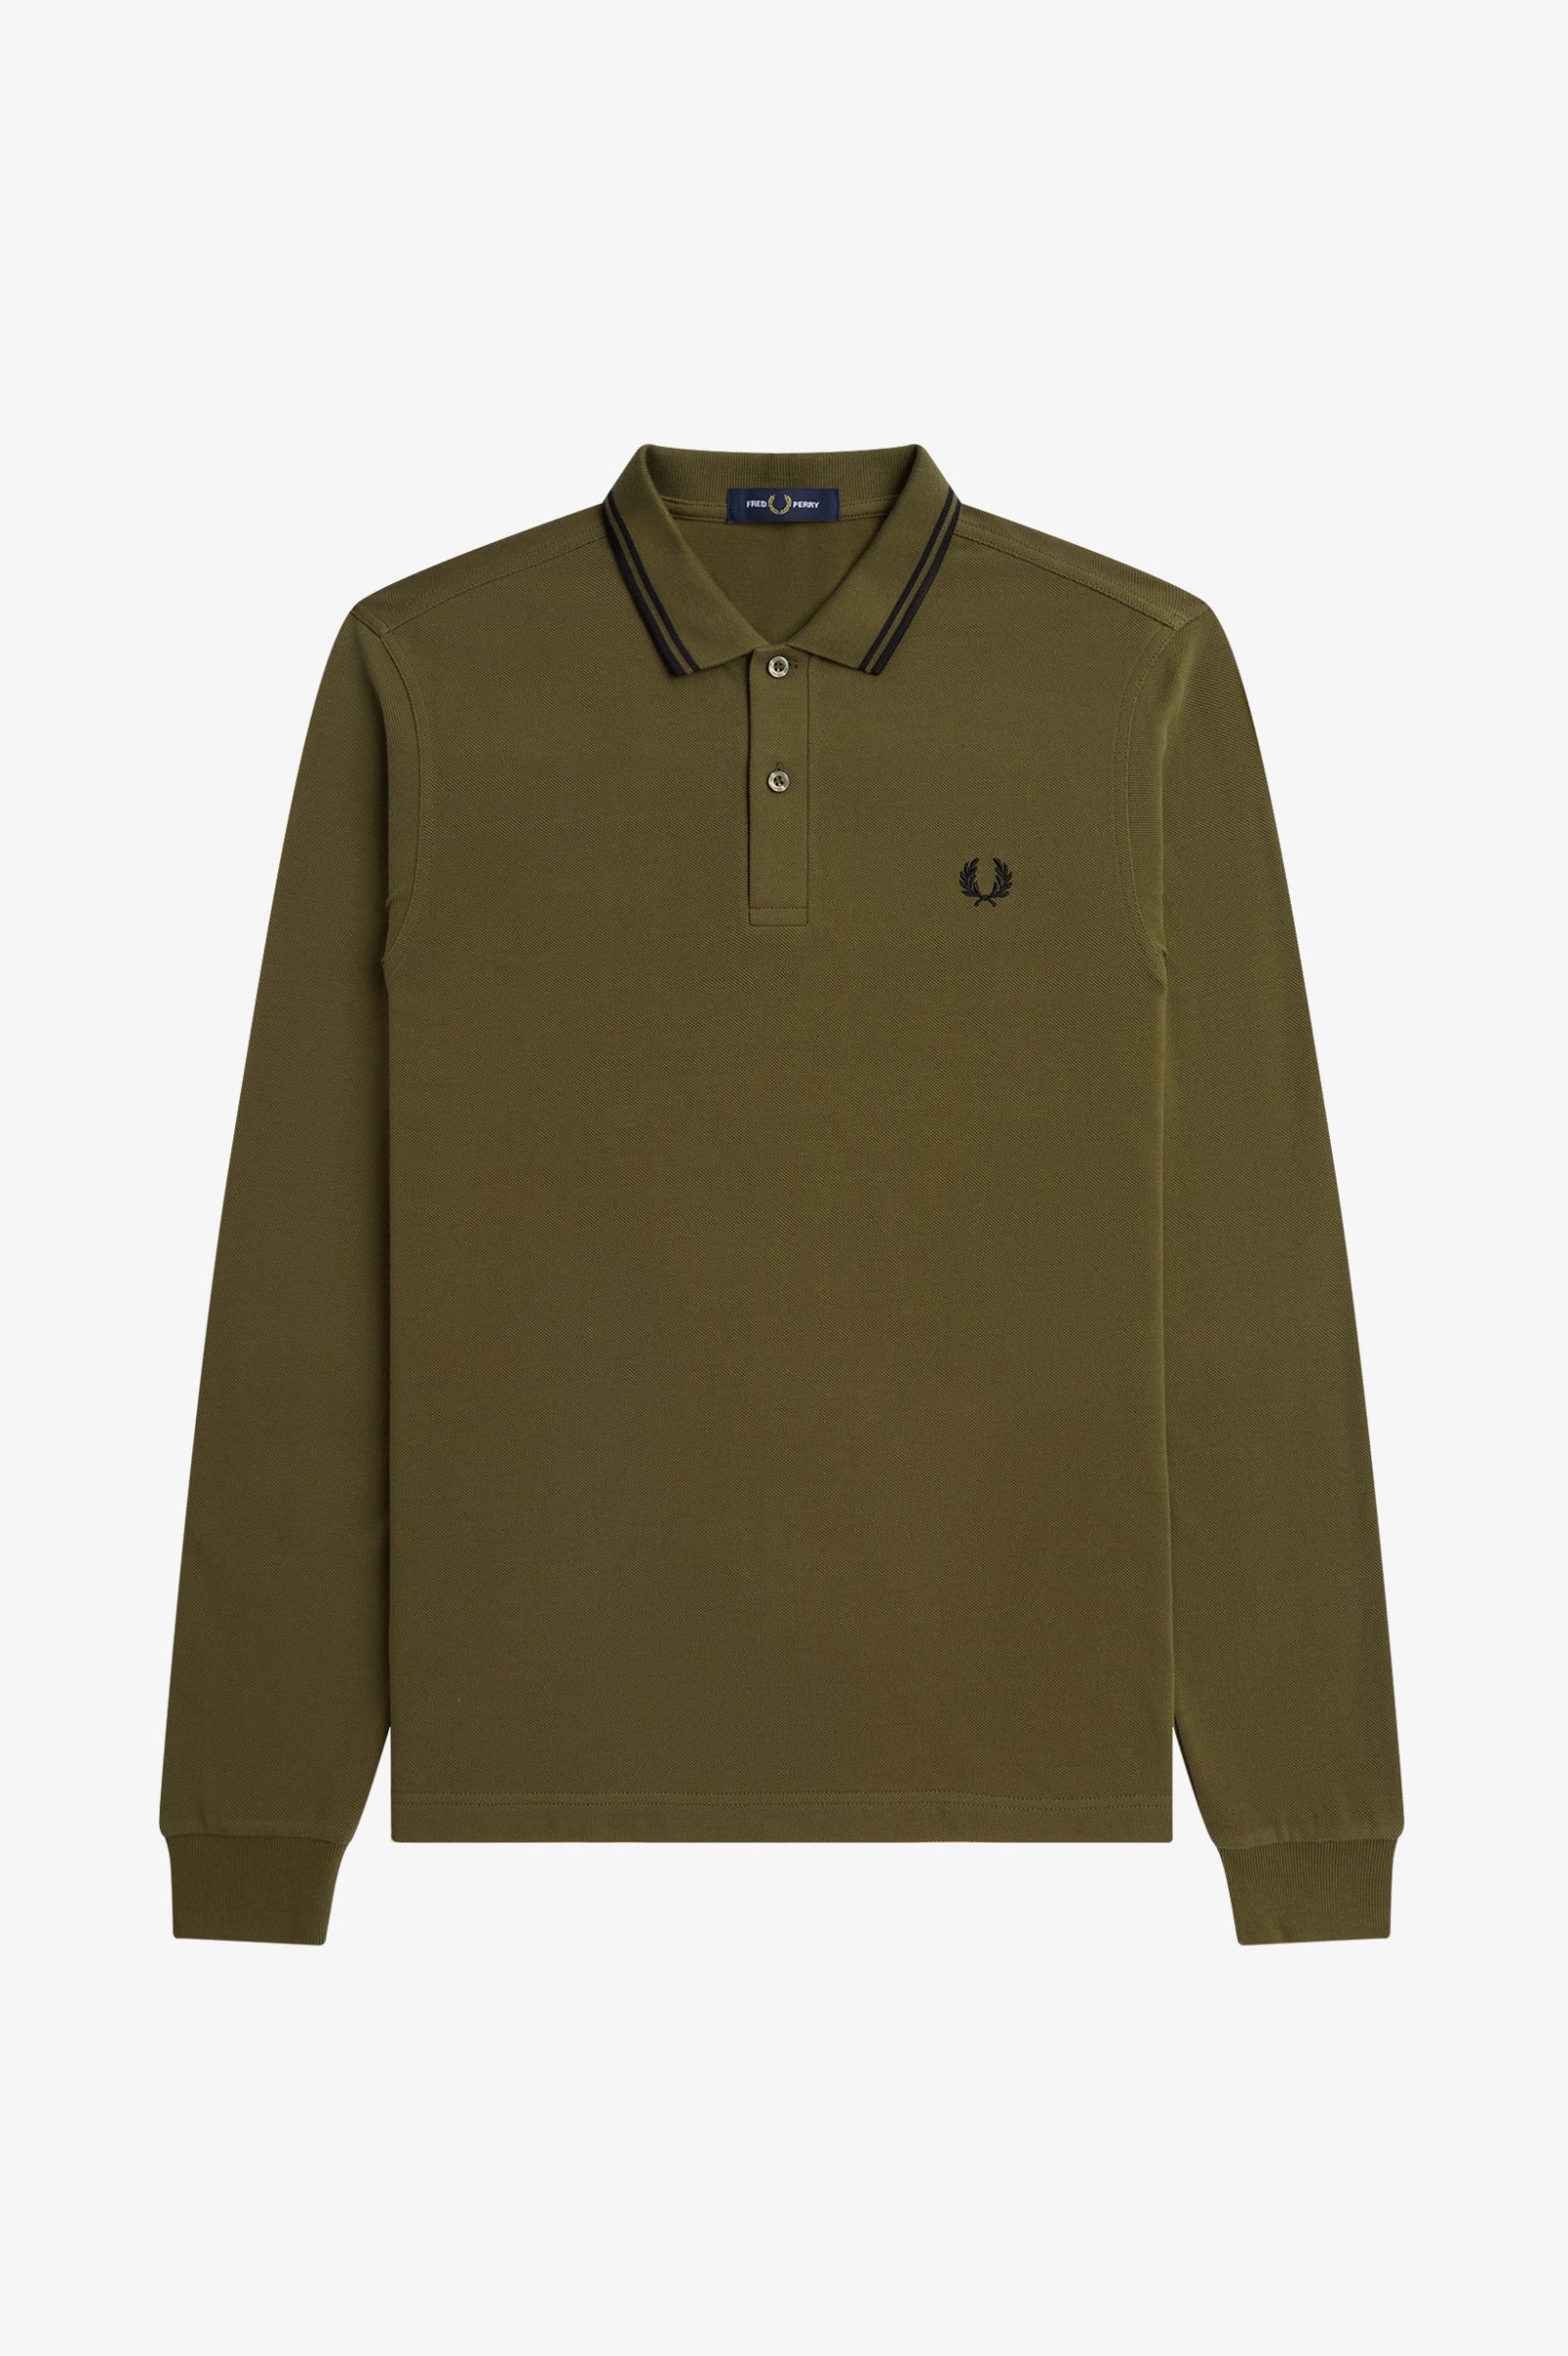 Fred Perry - The Fred Perry Shirt - M3636